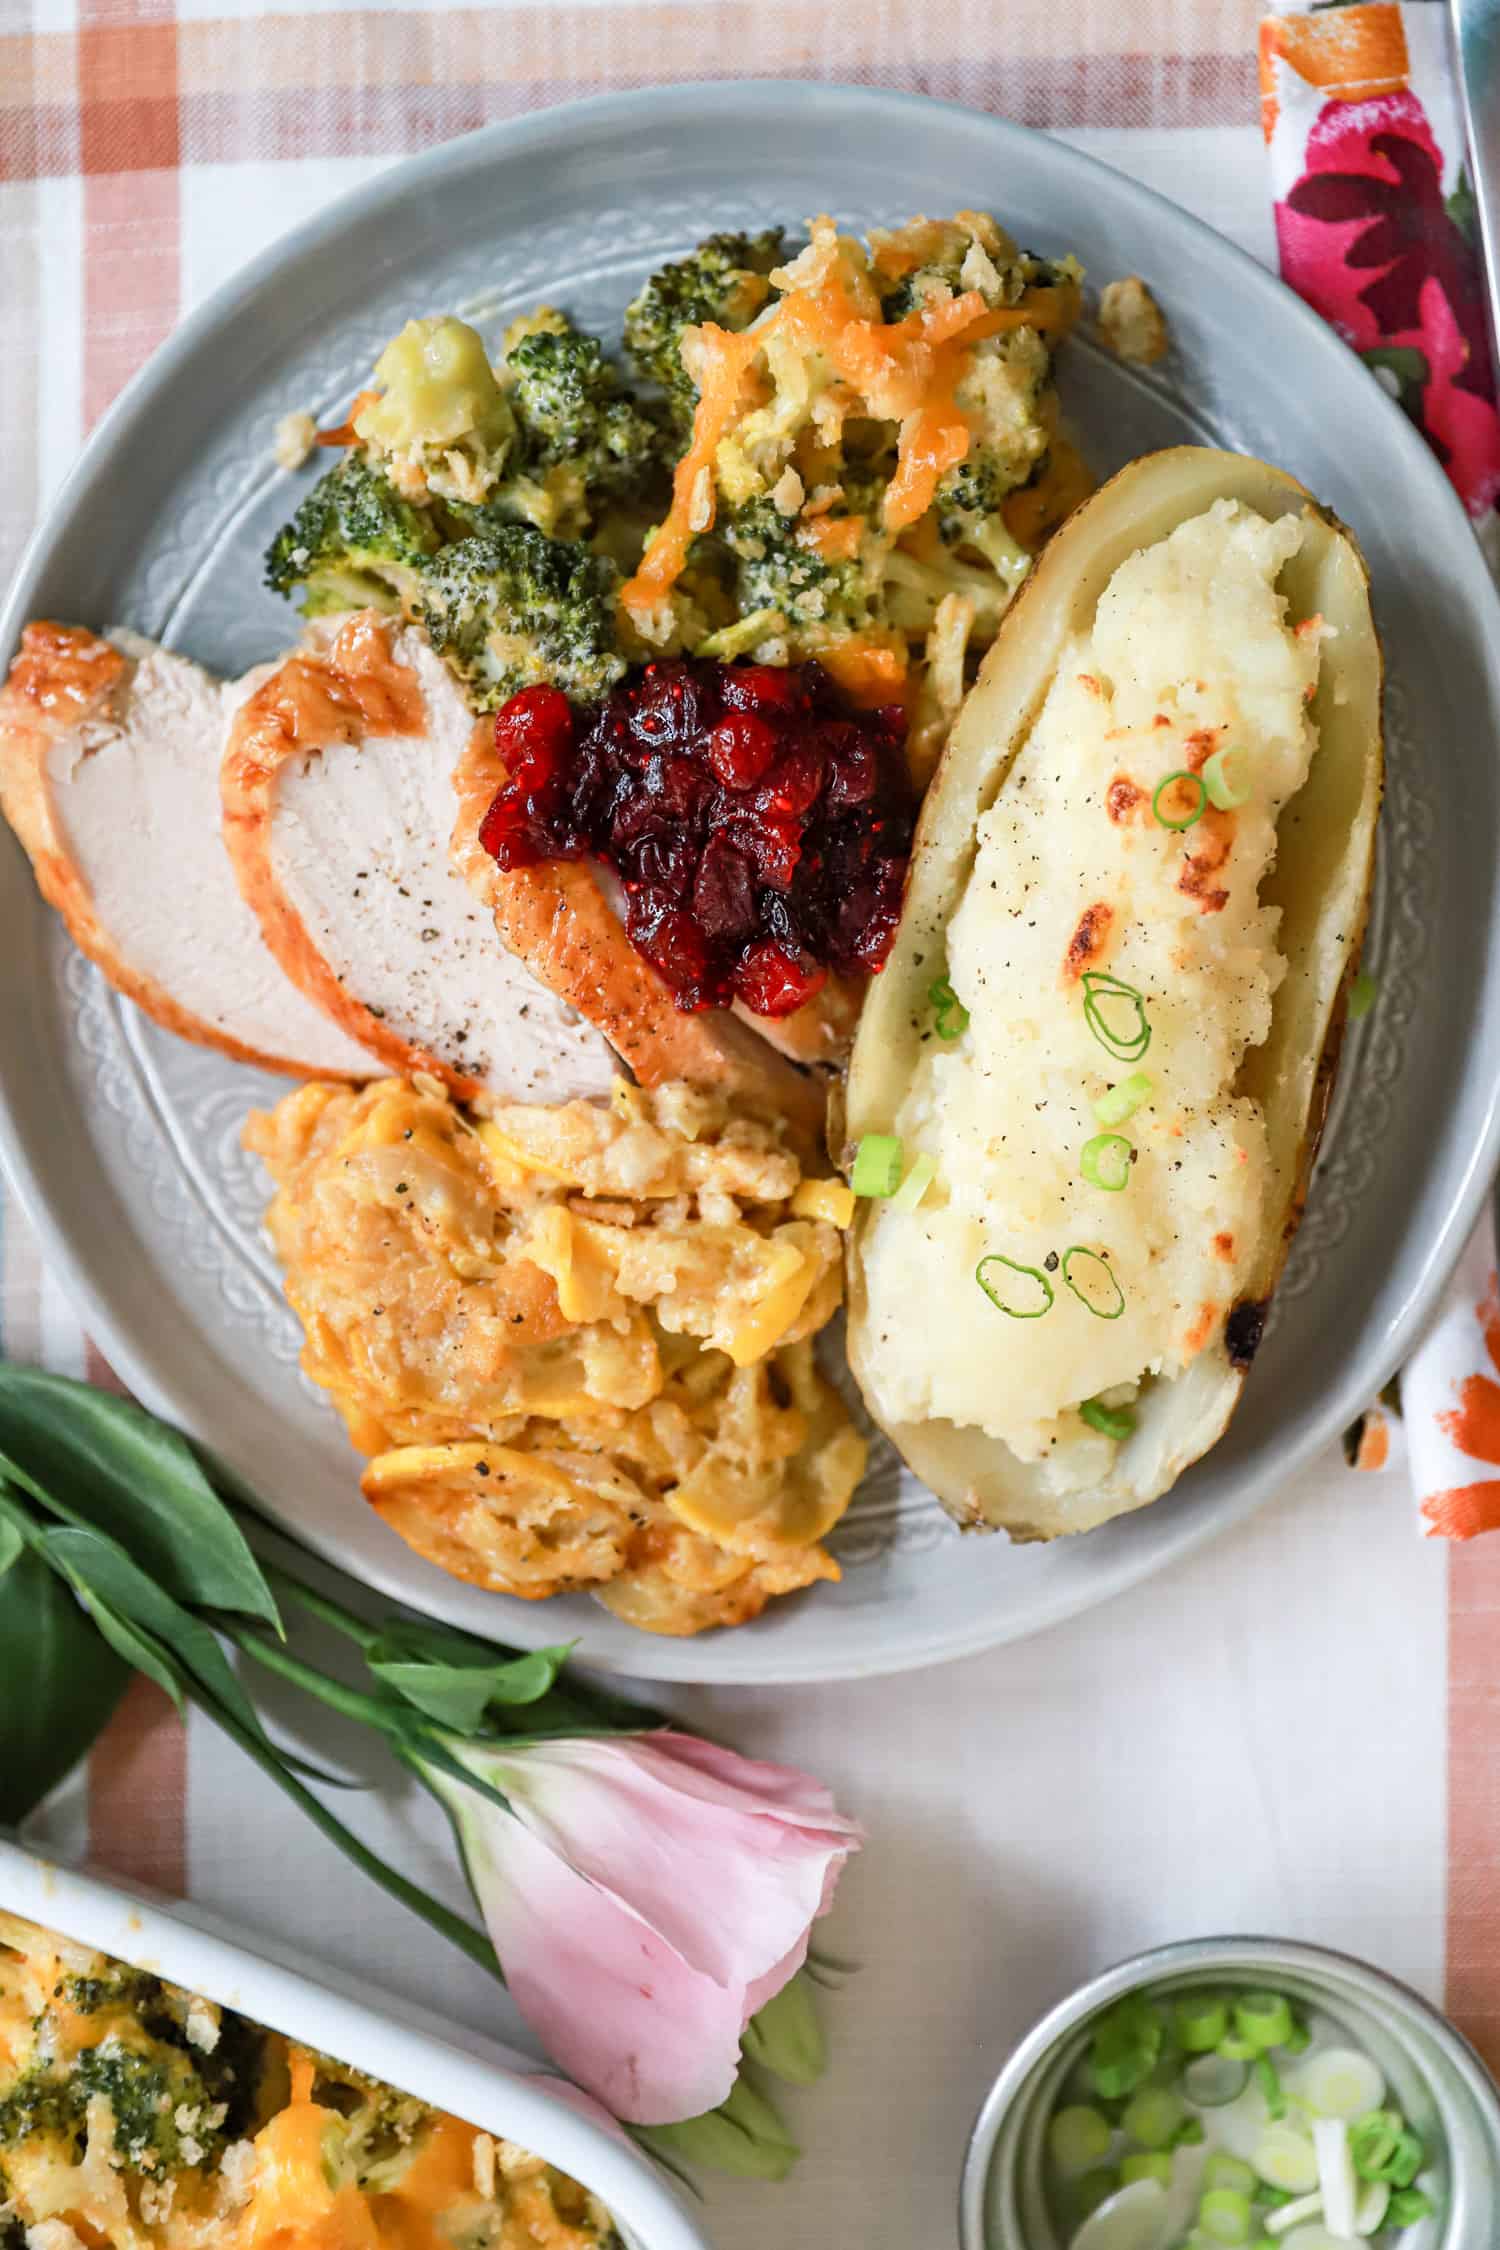 Thanksgiving plate with turkey, cranberry sauce, squash and broccoli casseroles, and half a twice baked potato on a ceramic gray plate.